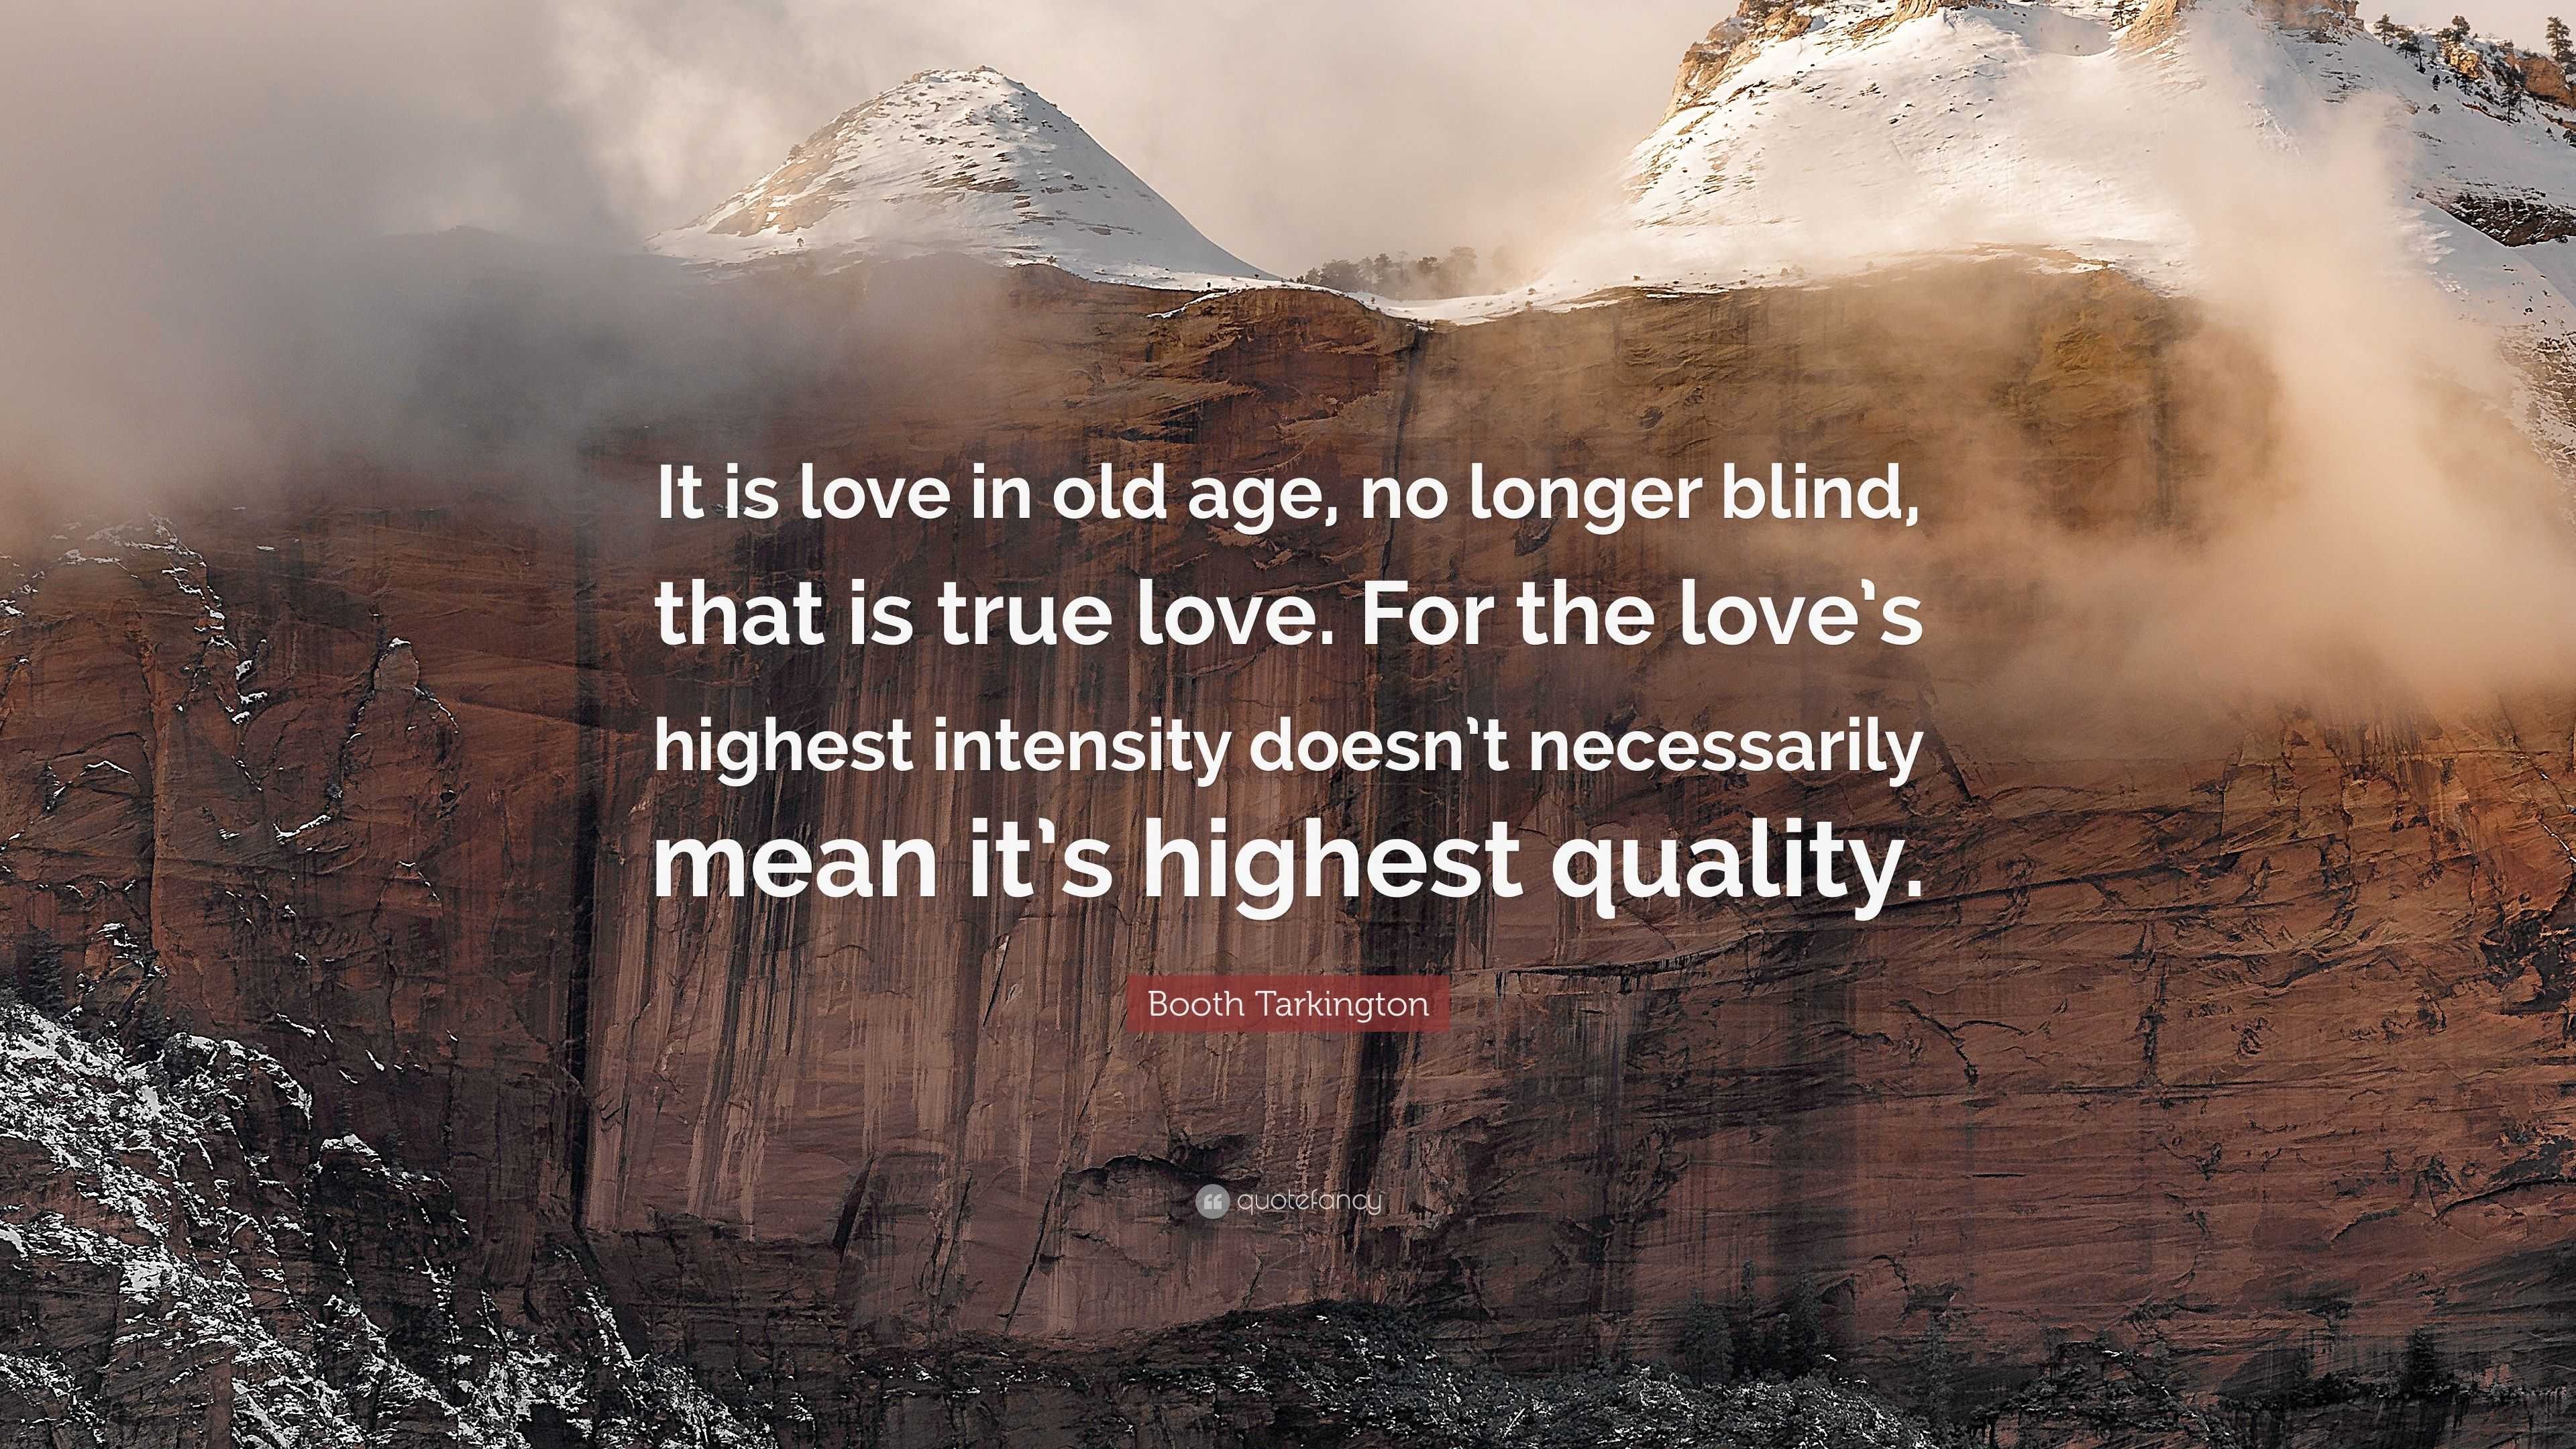 Booth Tarkington Quote “It is love in old age no longer blind